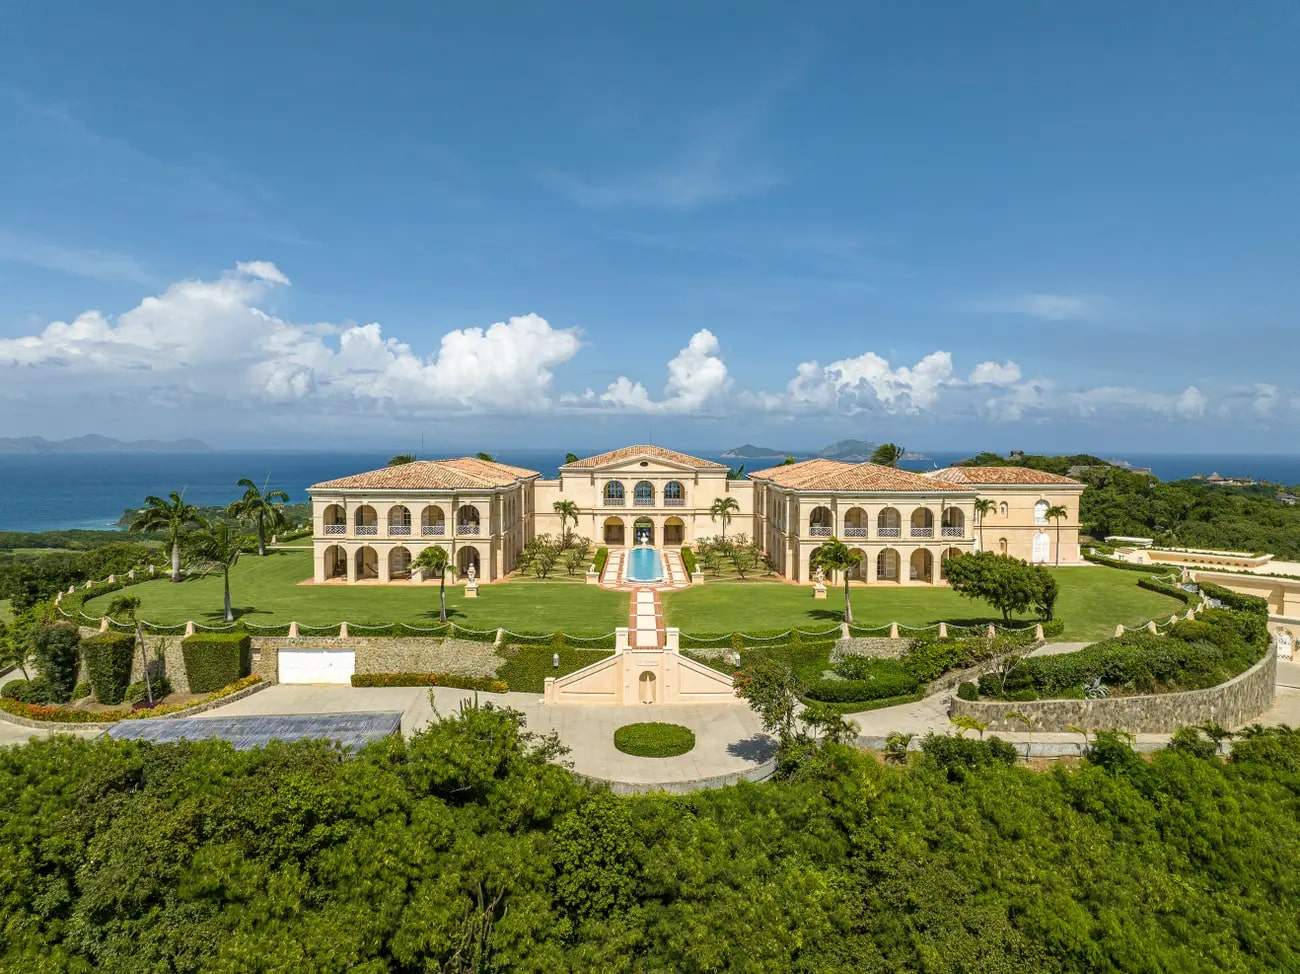 Knight Frank has just put this incredible mansion in the Caribbean up for sale, with a price tag of US$200 million. Photo: Knight Frank